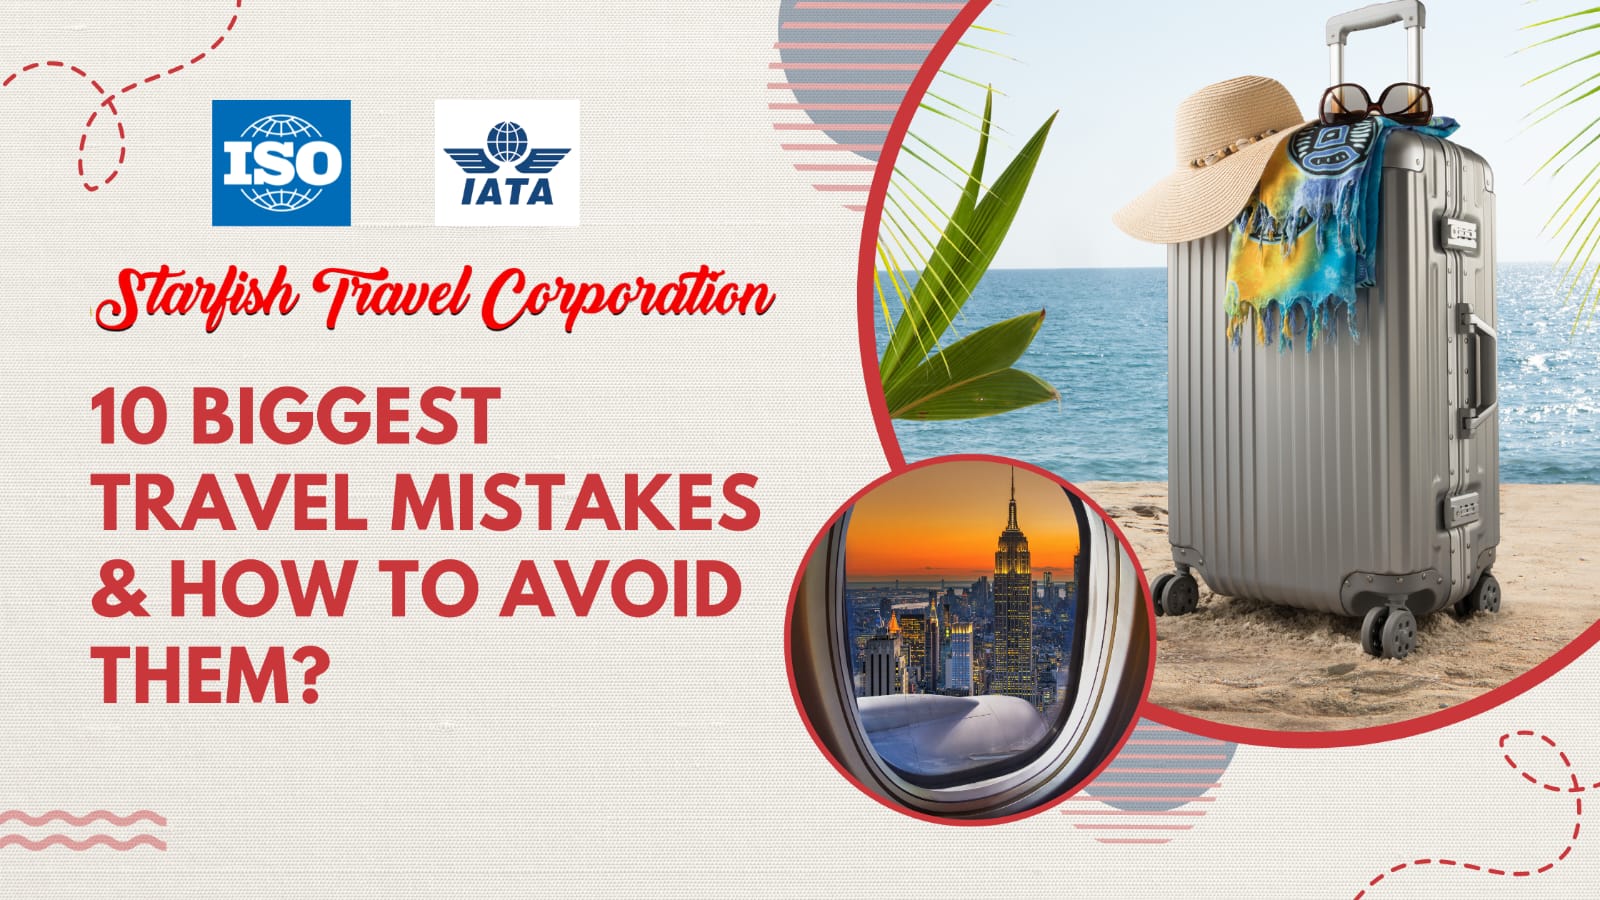 10 Biggest Travel Mistakes & How To Avoid Them?